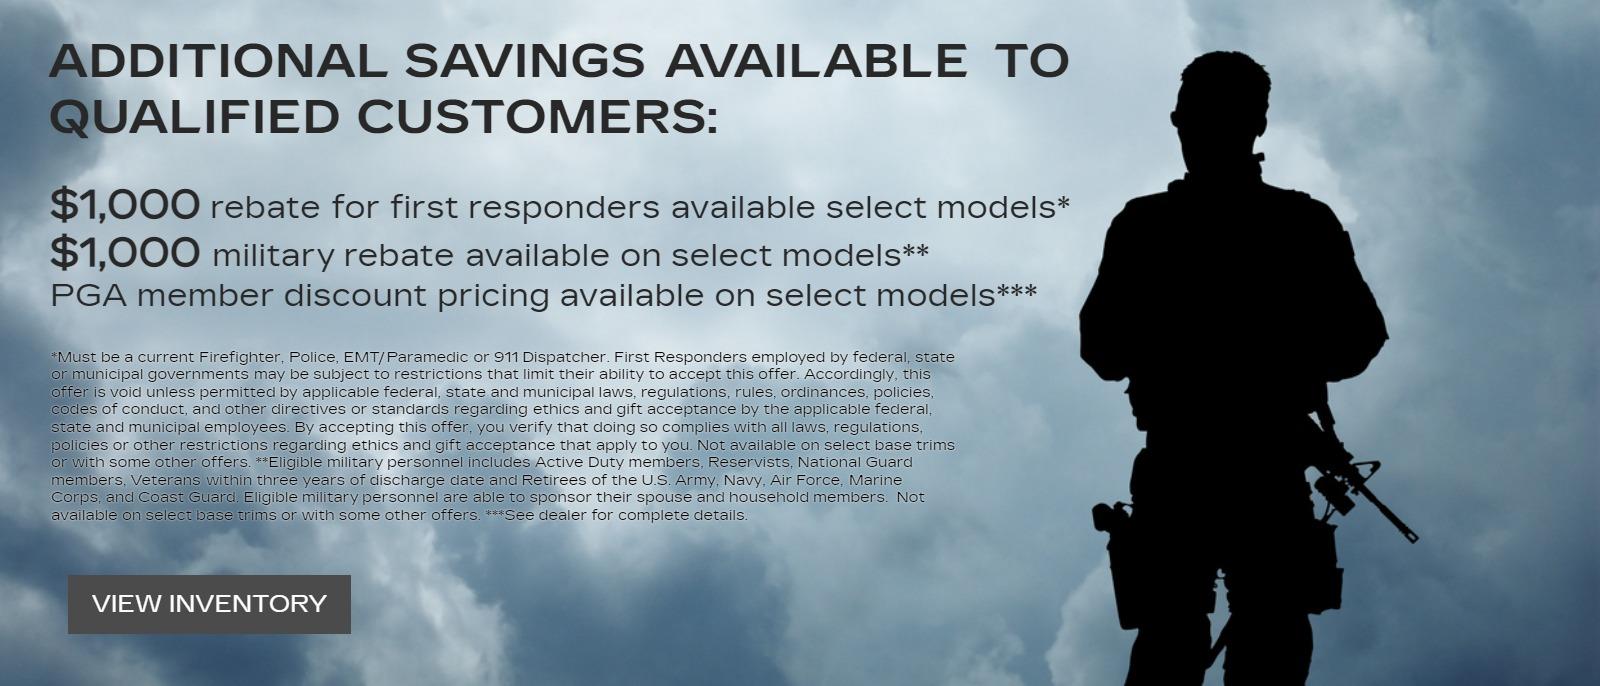 Additional savings available to qualified customers:

$1,000 rebate for first responders available select models*
$1,000 military rebate available on select models** PGA member discount pricing available on select models***